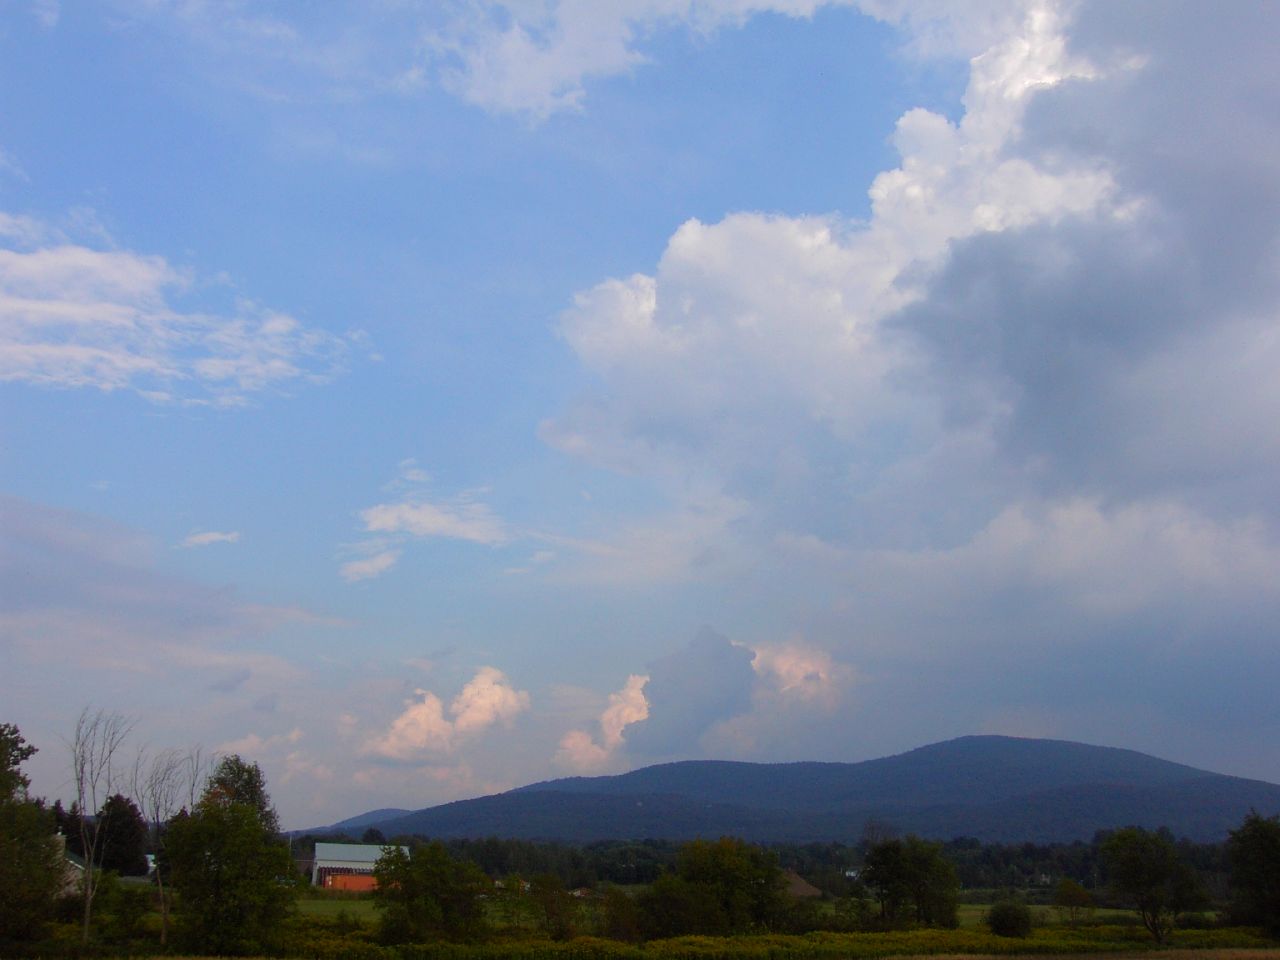 a blue sky over a green field with a farm in the foreground and some mountains in the background